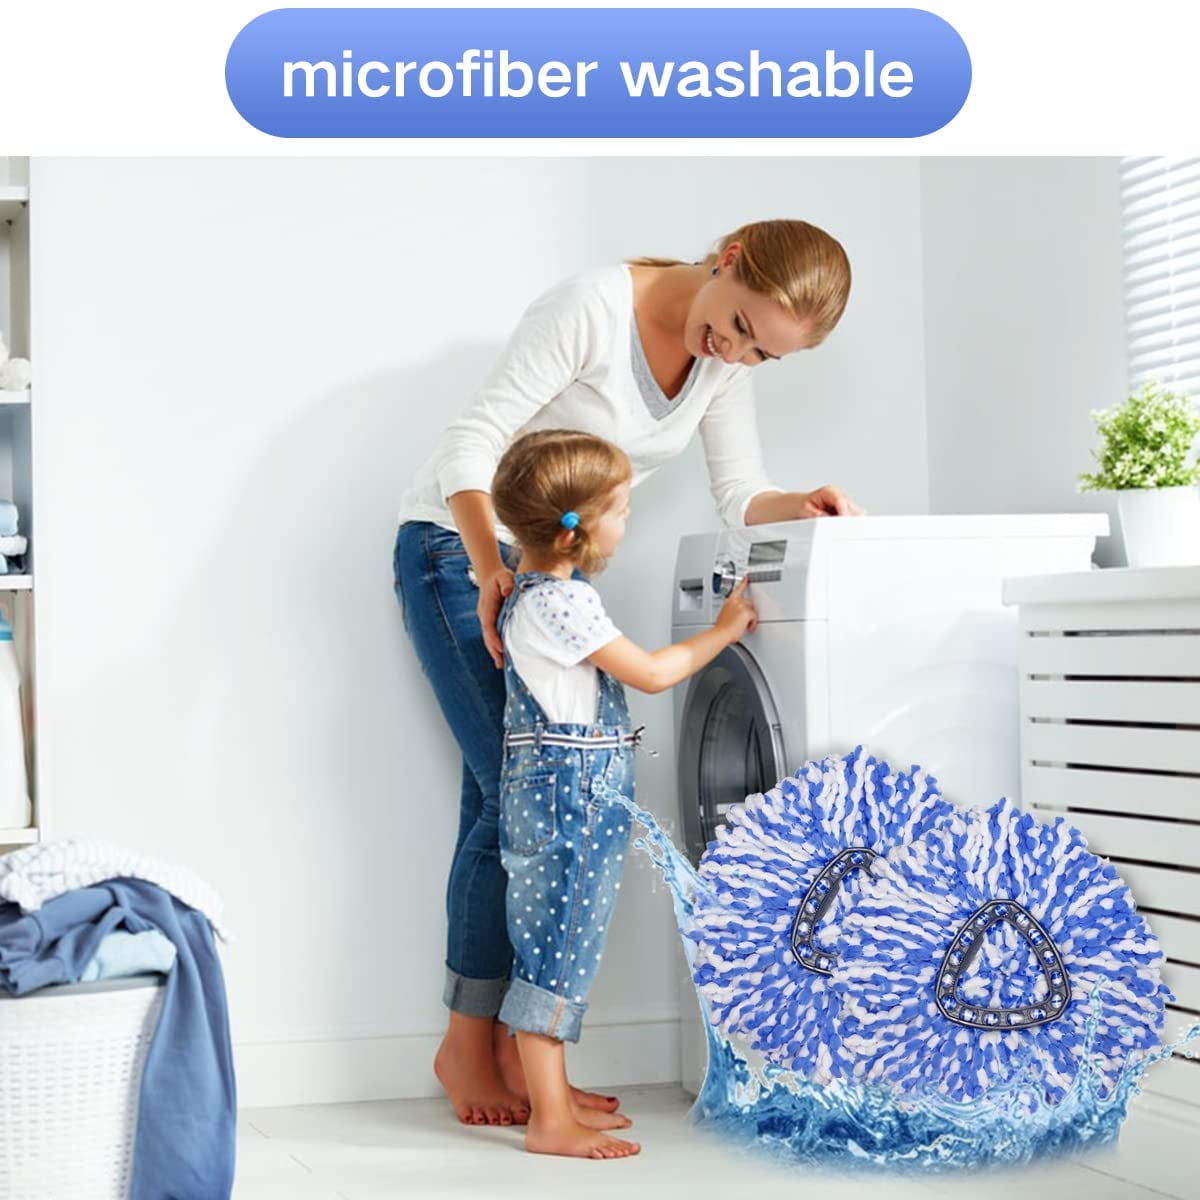 VACUSHOP 4-section Spin Mop Replacement Head Handle + 2-Tank Base+2 Mops  for O-Cedar EasyWring Spin Mop Microfiber Easy Cleaning of Home Floors